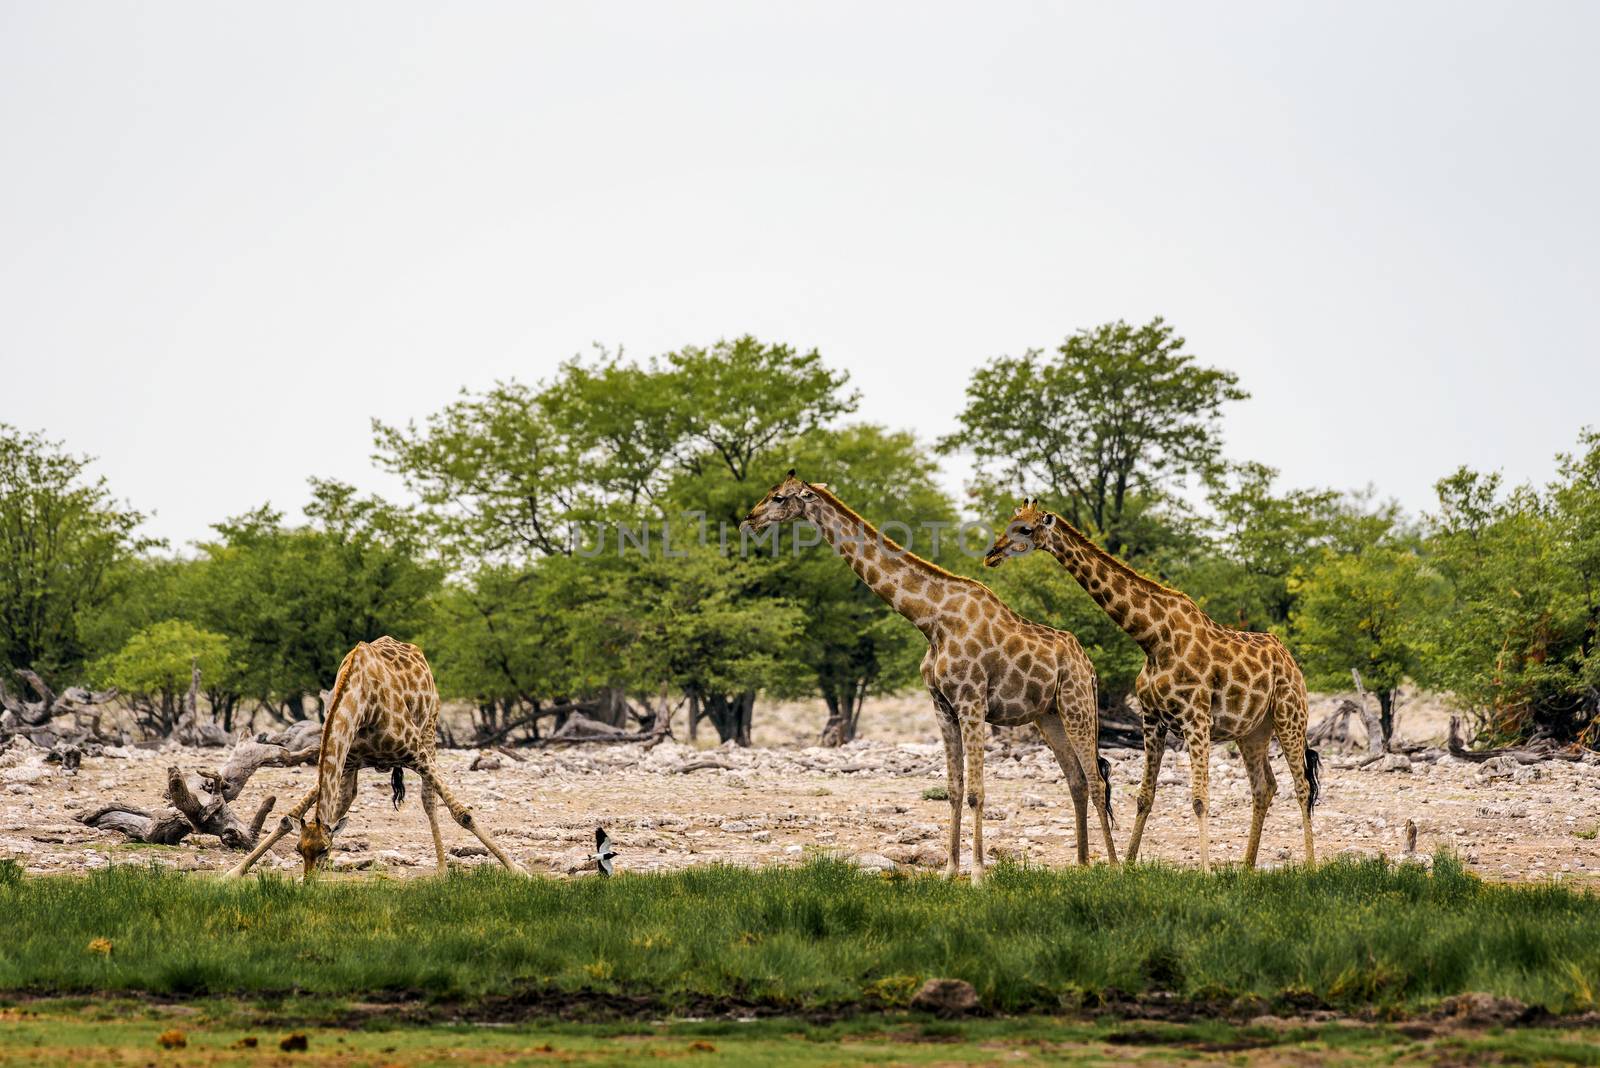 Giraffes drink water from a waterhole in Etosha National Park, Namibia.